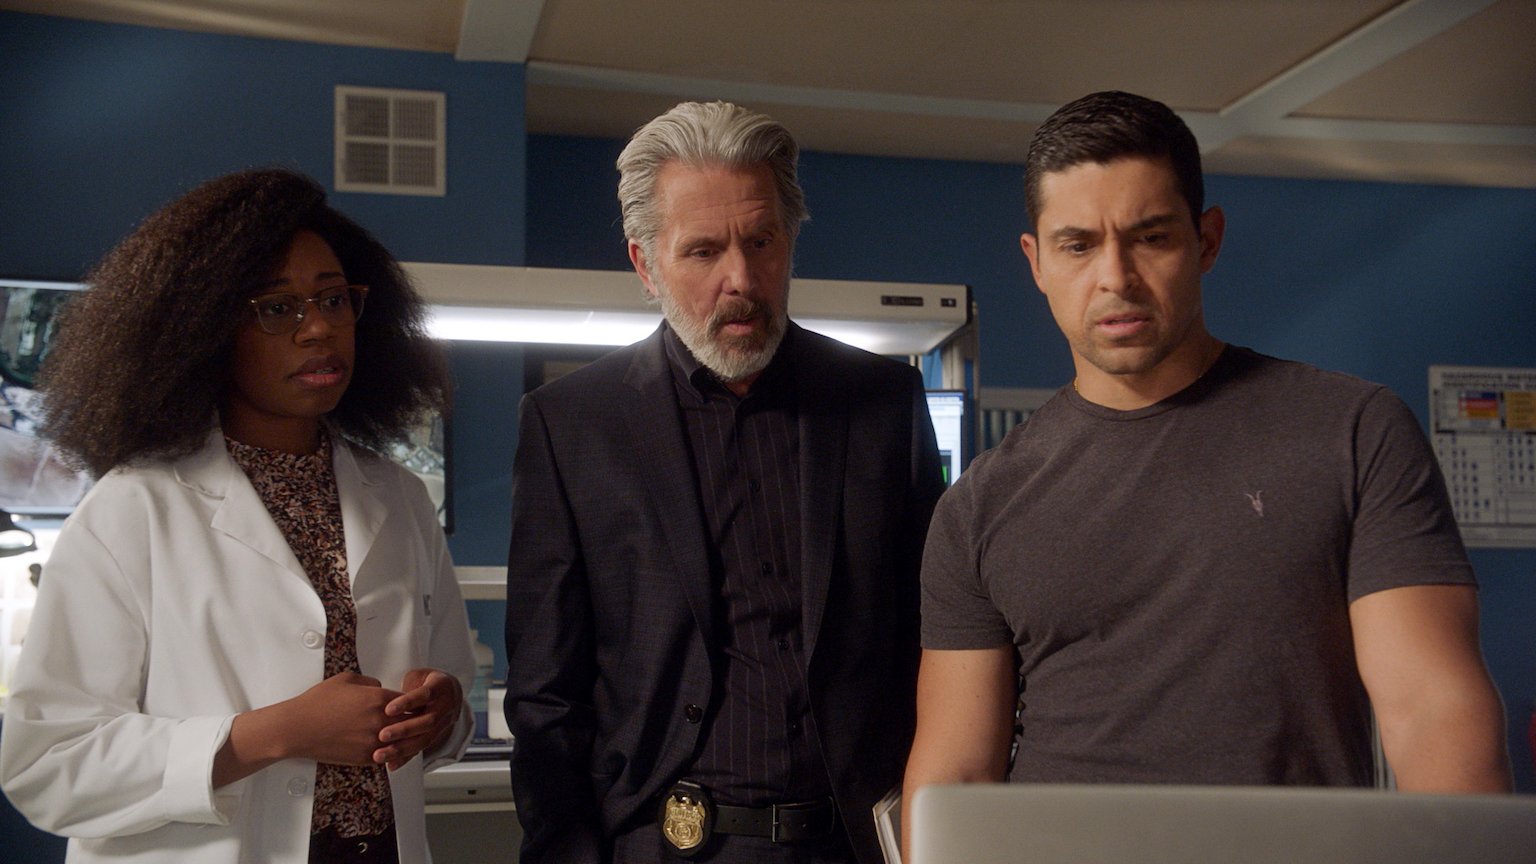 Diona Reasonover, Gary Cole, and Wilmer Valderrama in 'NCIS.' Gary Cole returns as Alden Parker in 'NCIS' Season 20